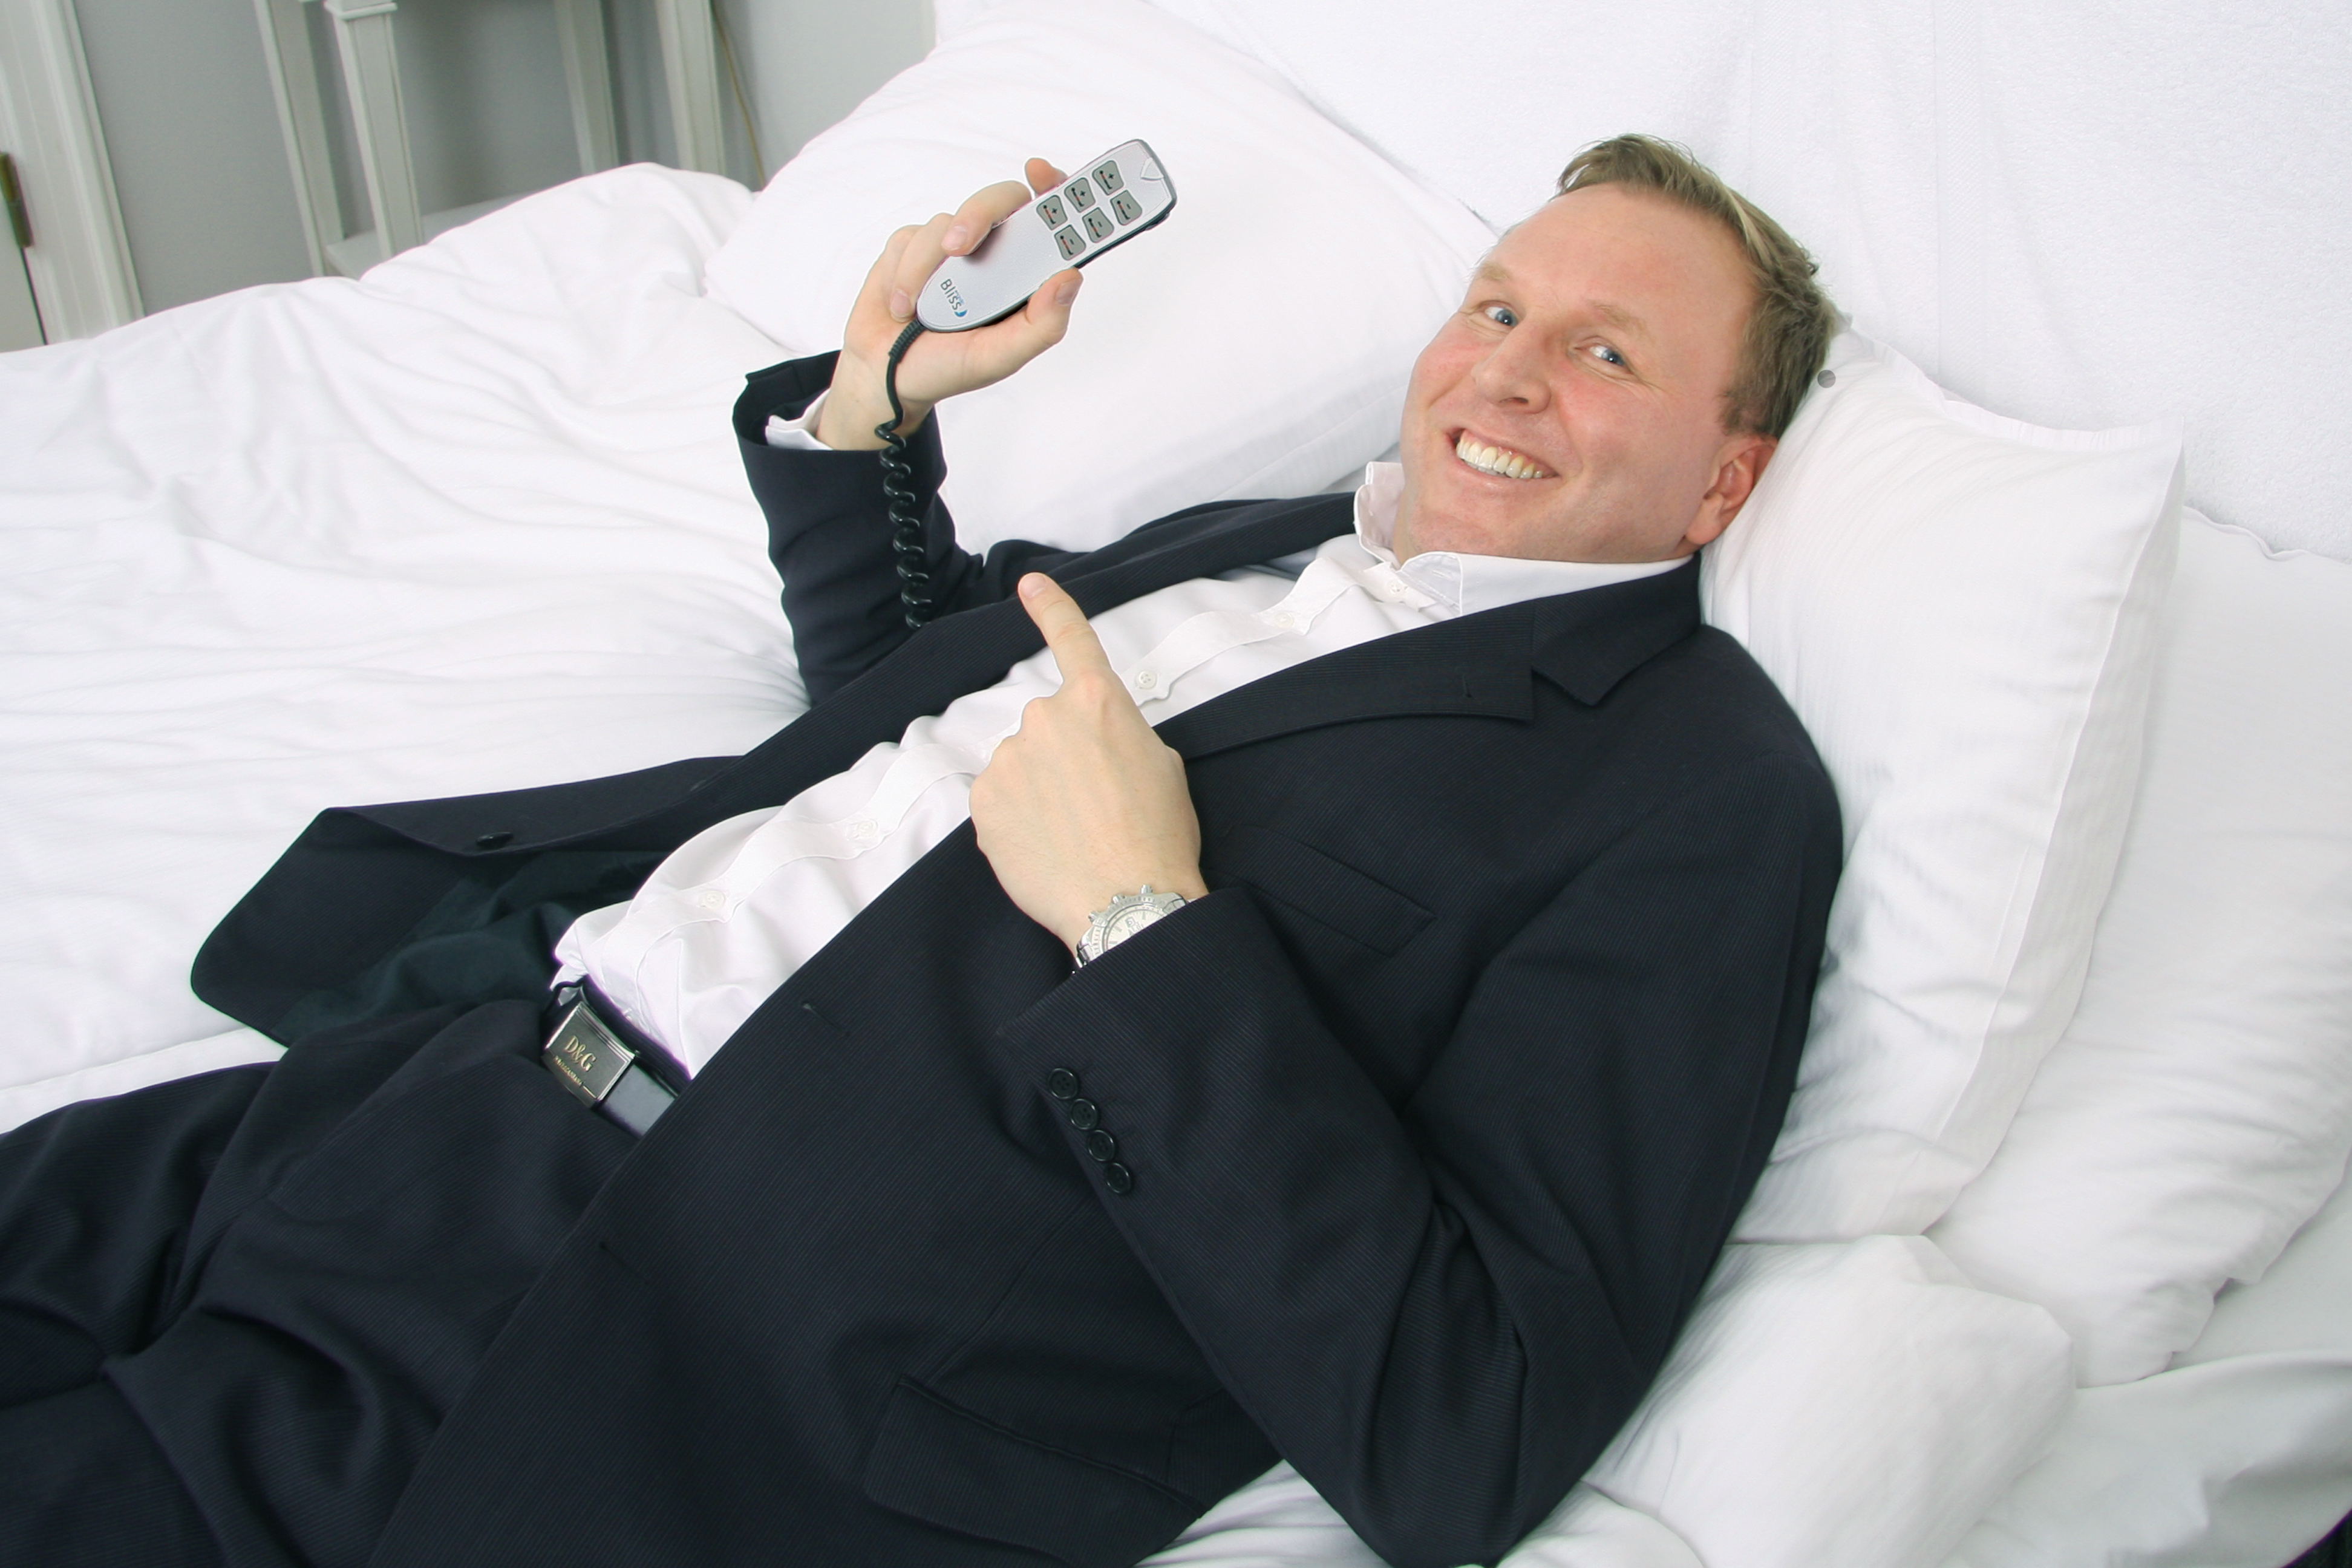 Mattias Sörensen, CEO Bliss Nordic, demonstrates how the bed Bliss easily adjusts with a remote control.